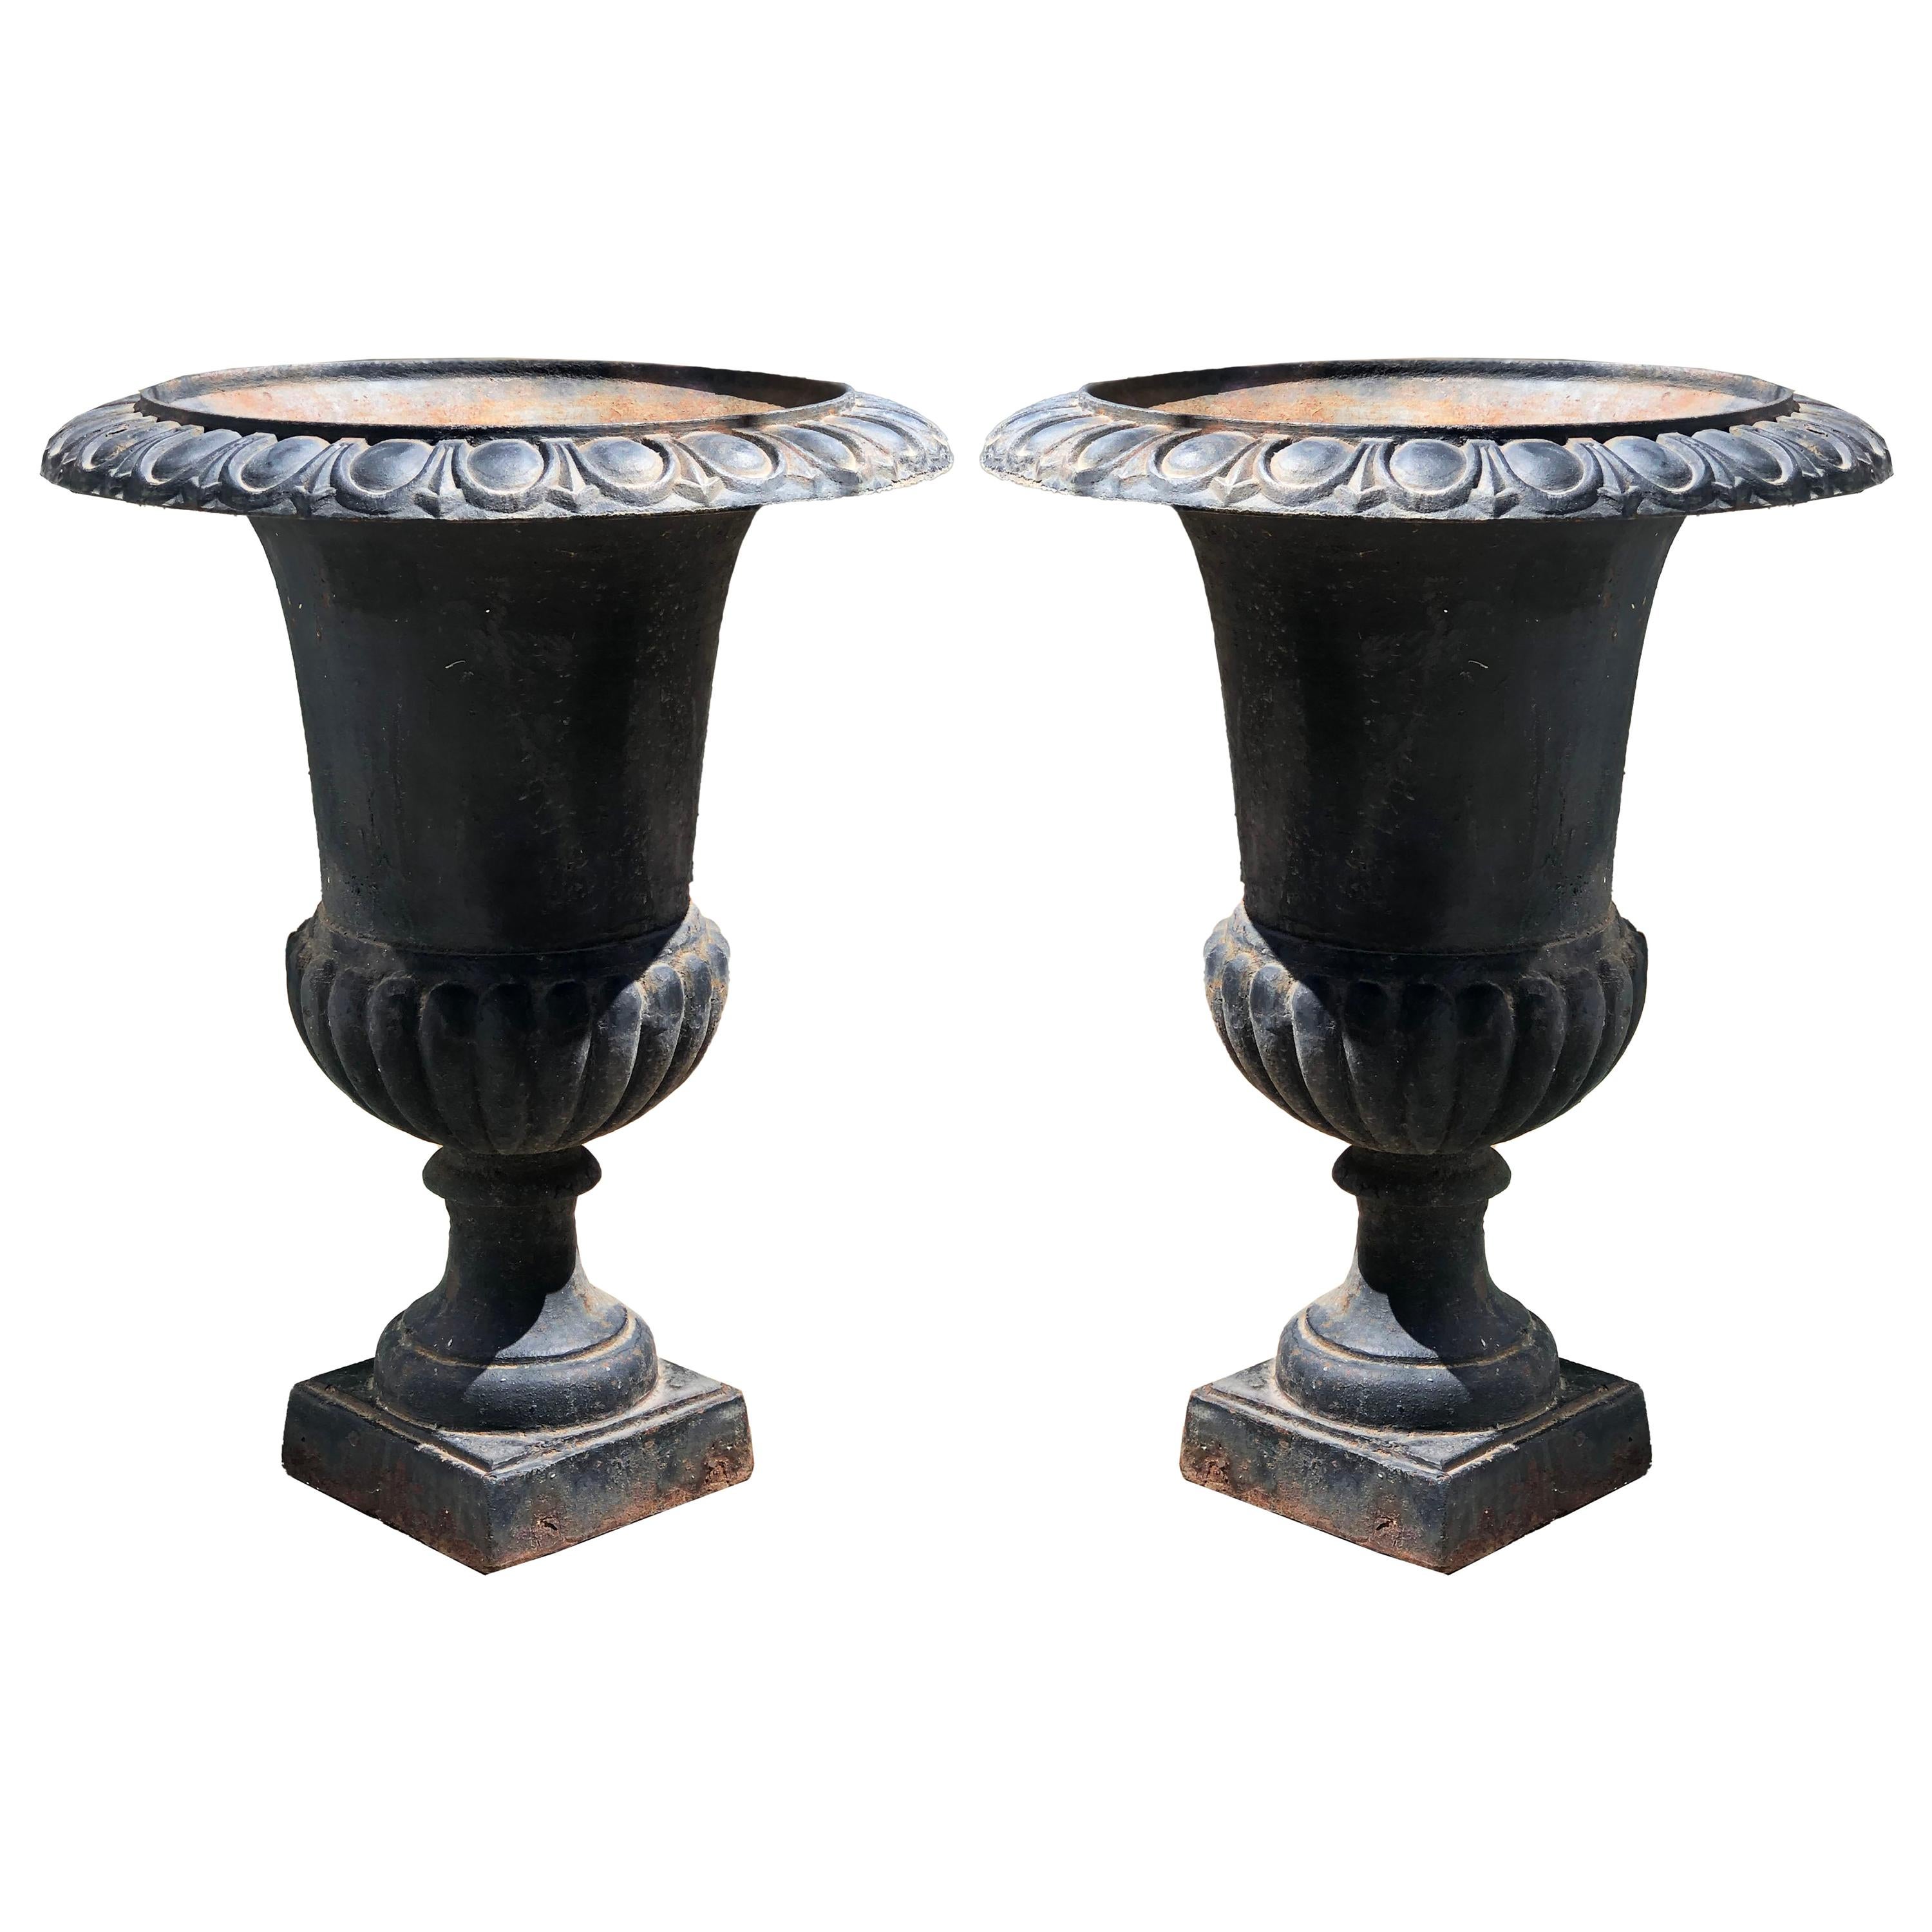 Pair of Vintage Large Black Cast Iron Neoclassical Urn Planters